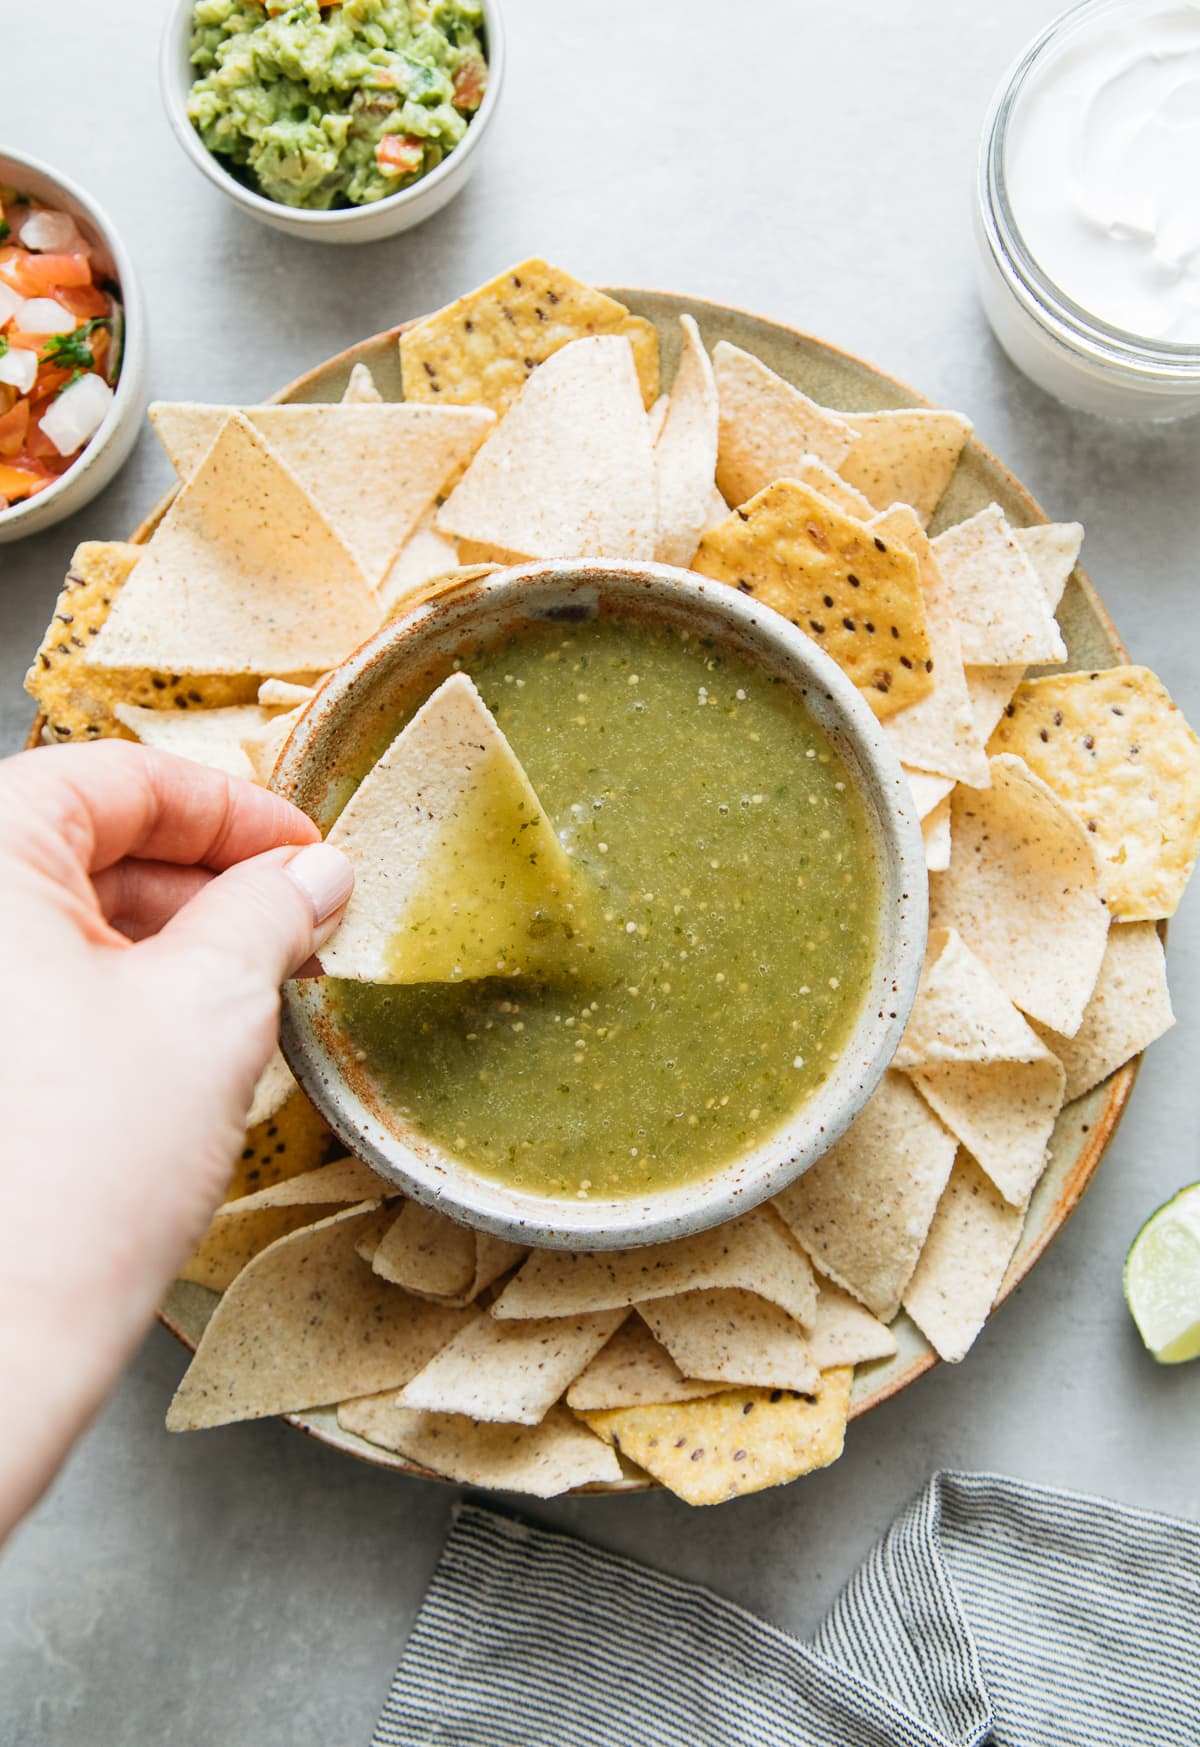 top down view of chip being dipped into bowl filled with tomatillo verde sauce surrounding by tortilla chips and other items.